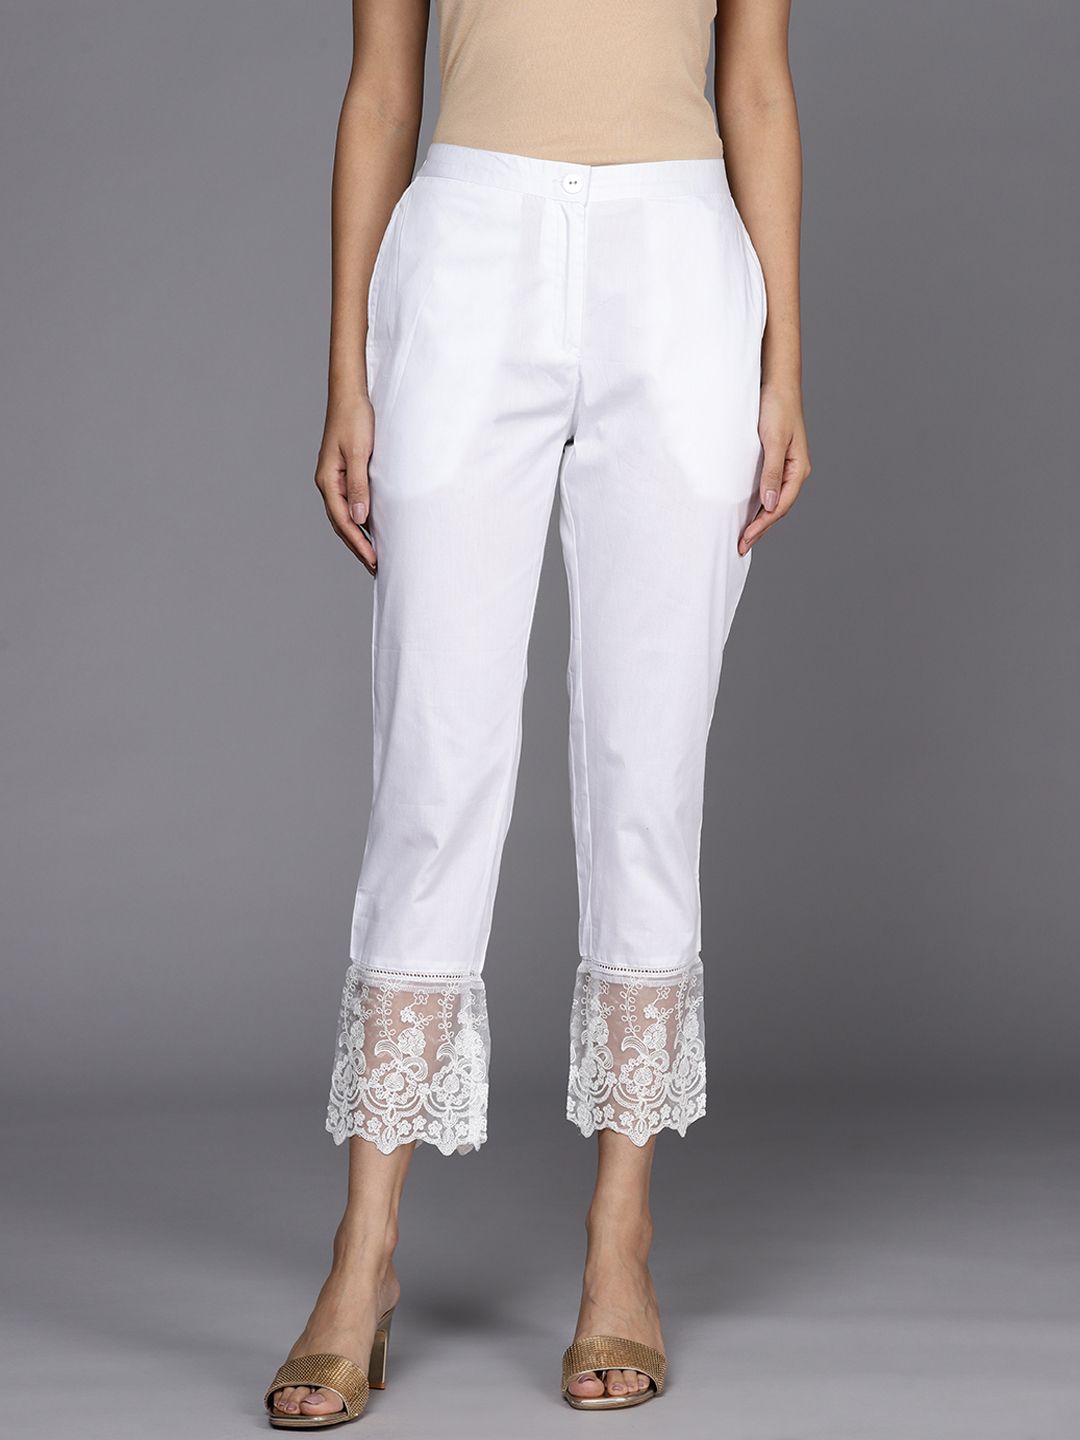 Libas Women White Solid Pure Cotton Trousers with Lace Inserts Price in India